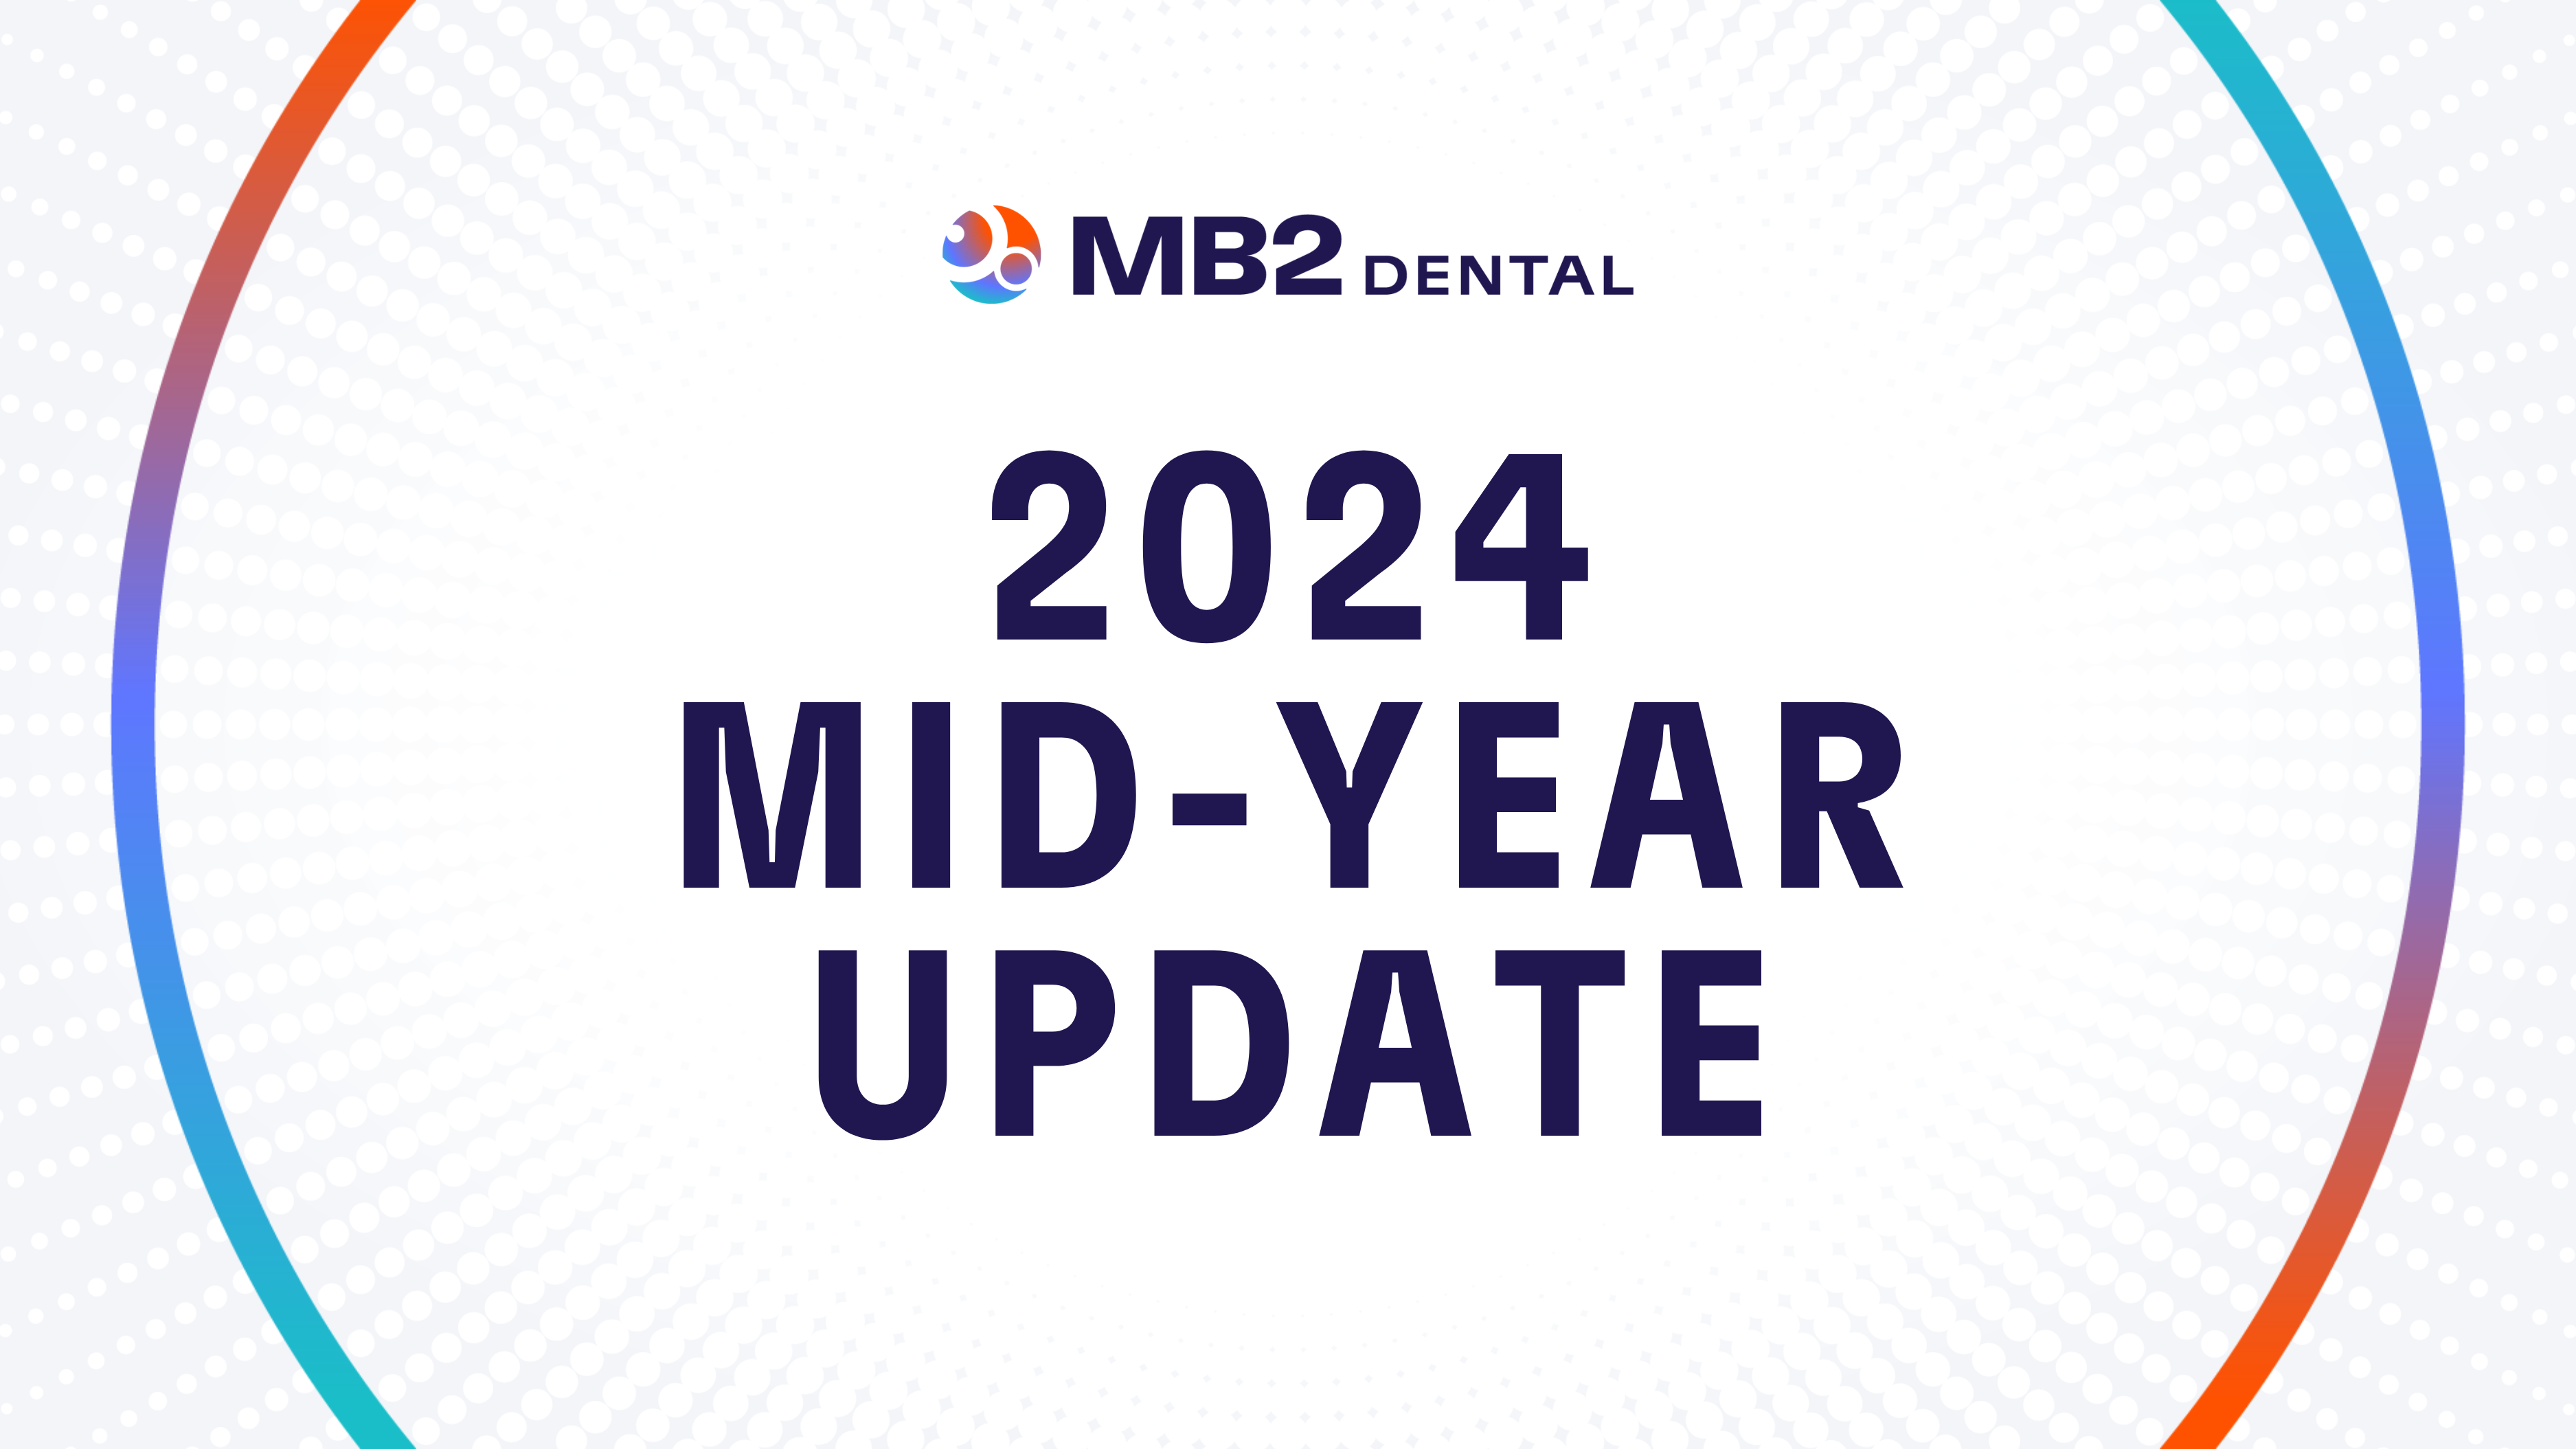 MB2 Dental's Mid-Year Update